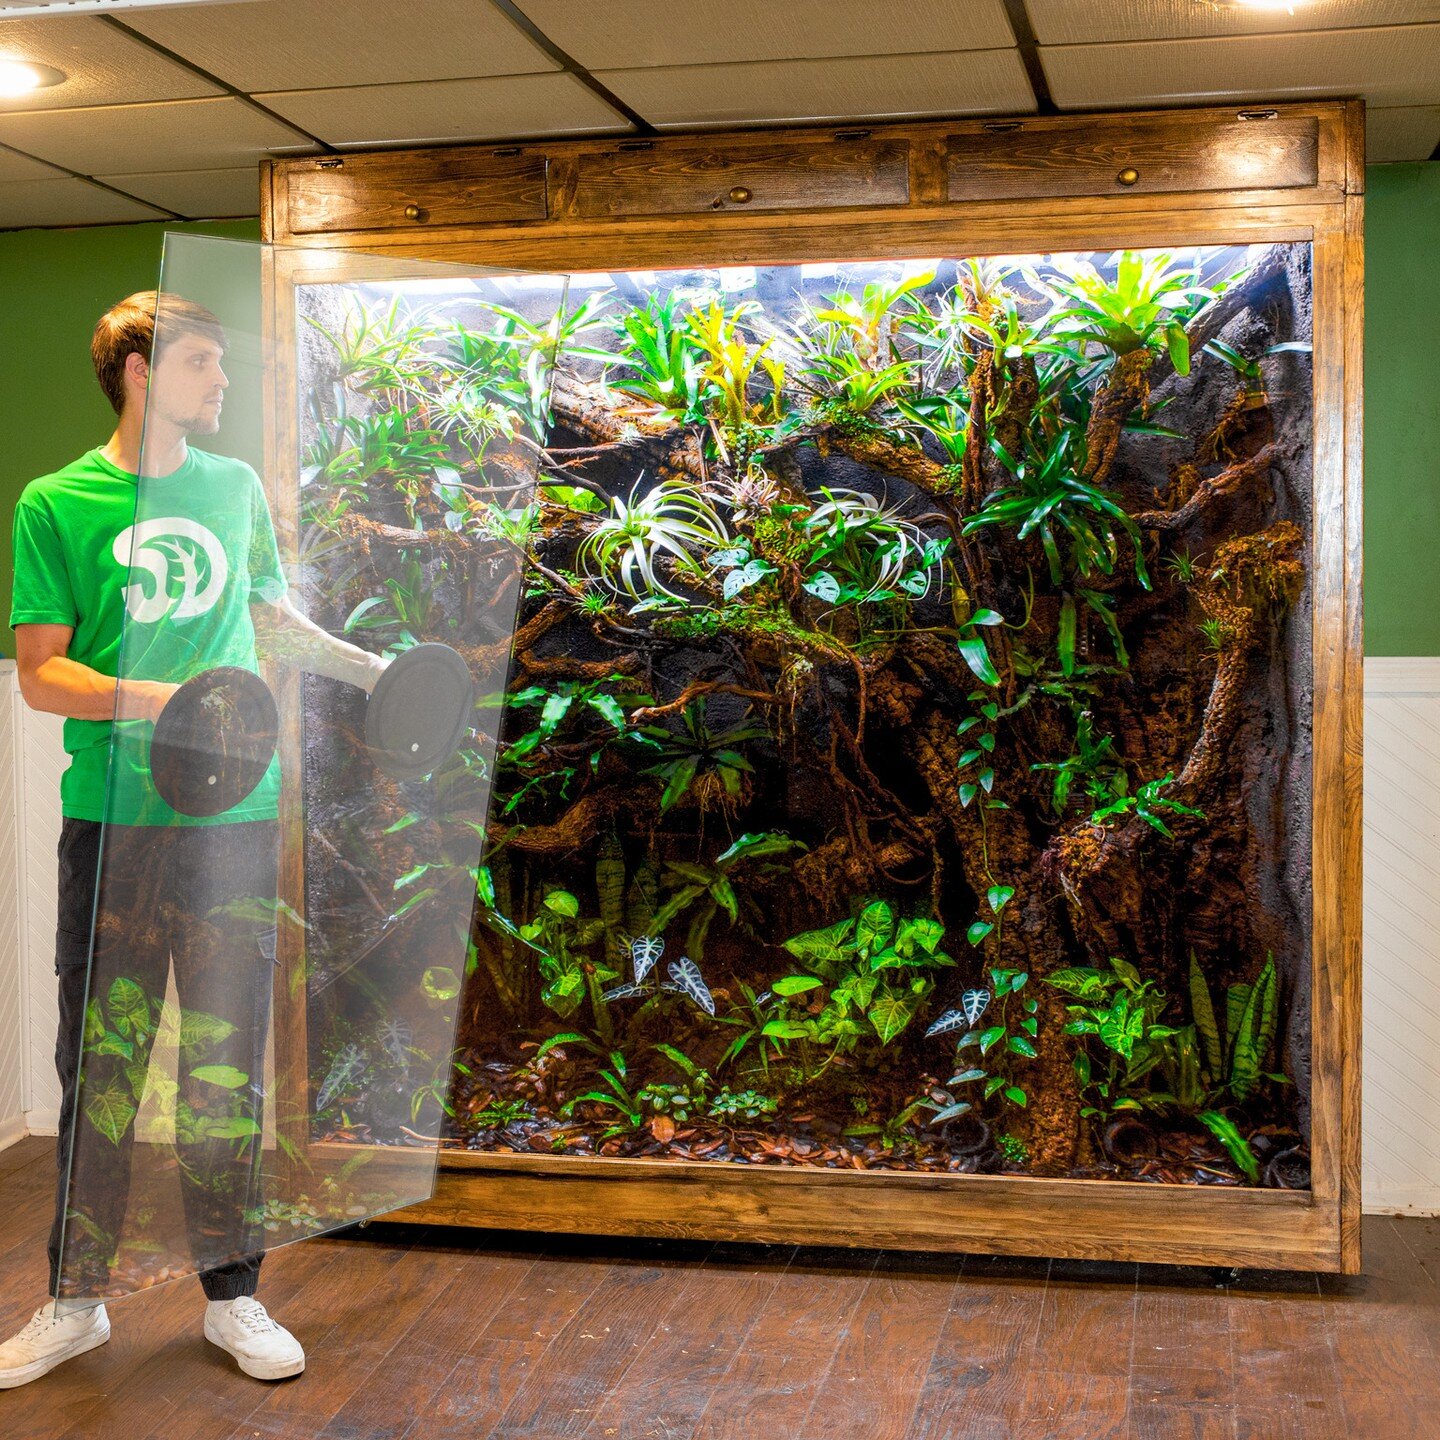 I had to take dismantle the 600 Gallon Vivarium in this week's video. (link in bio) I won't rebuild it for at least a month, but I can't wait to show you what I'm going to do with it next. I'll take it in a completely different direction.